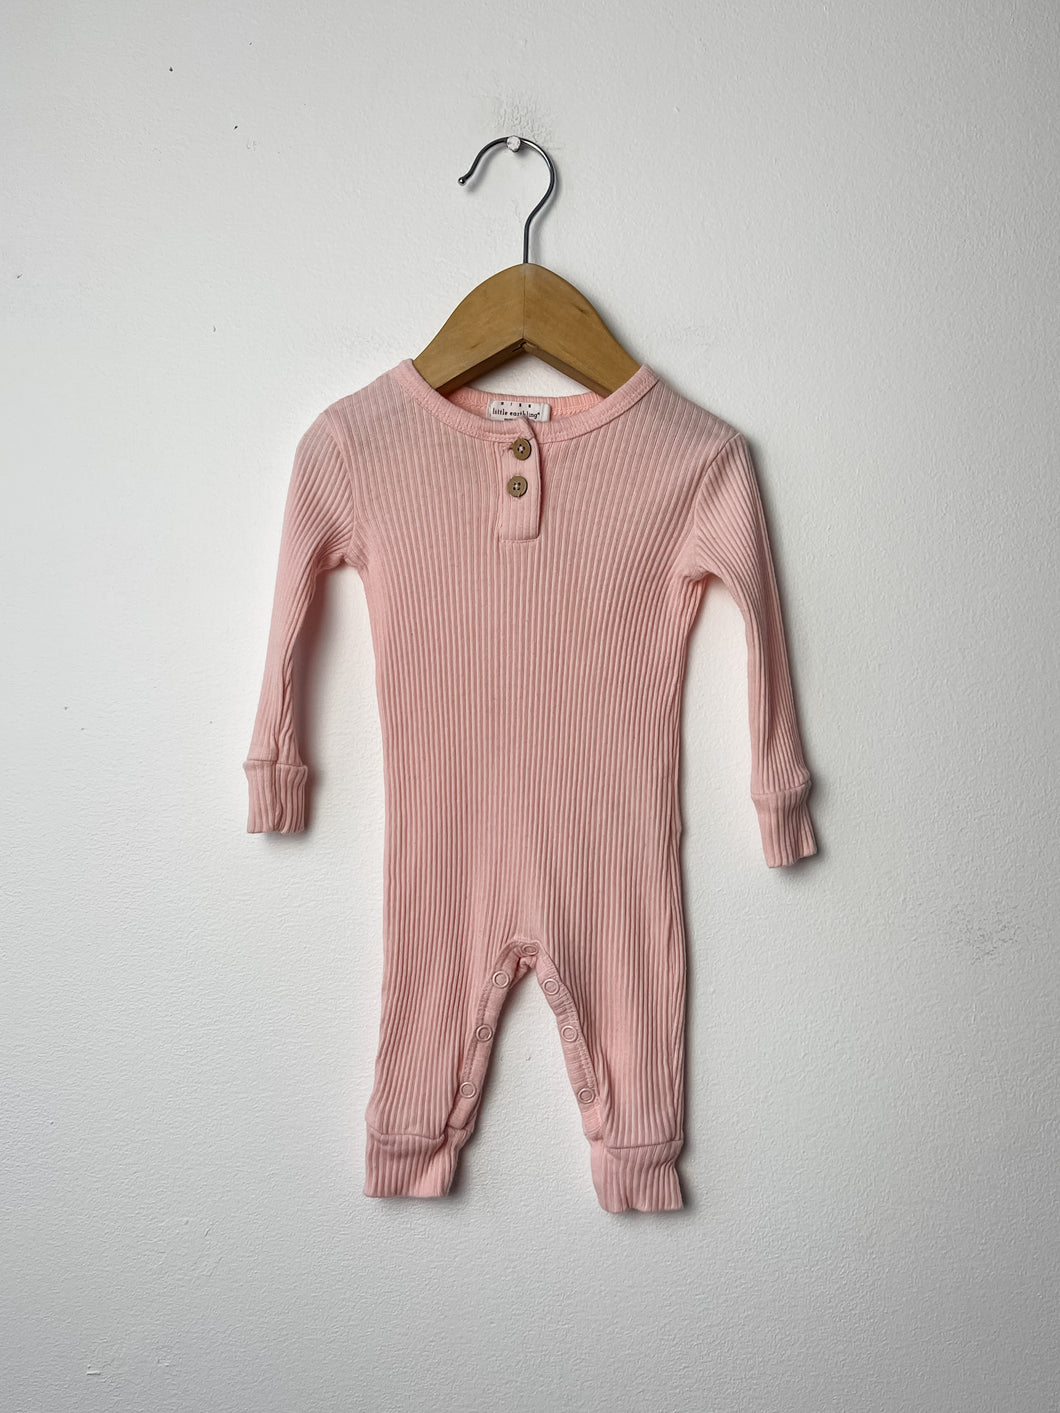 Pink Rise Little Earthling Romper Size 3-6 Months